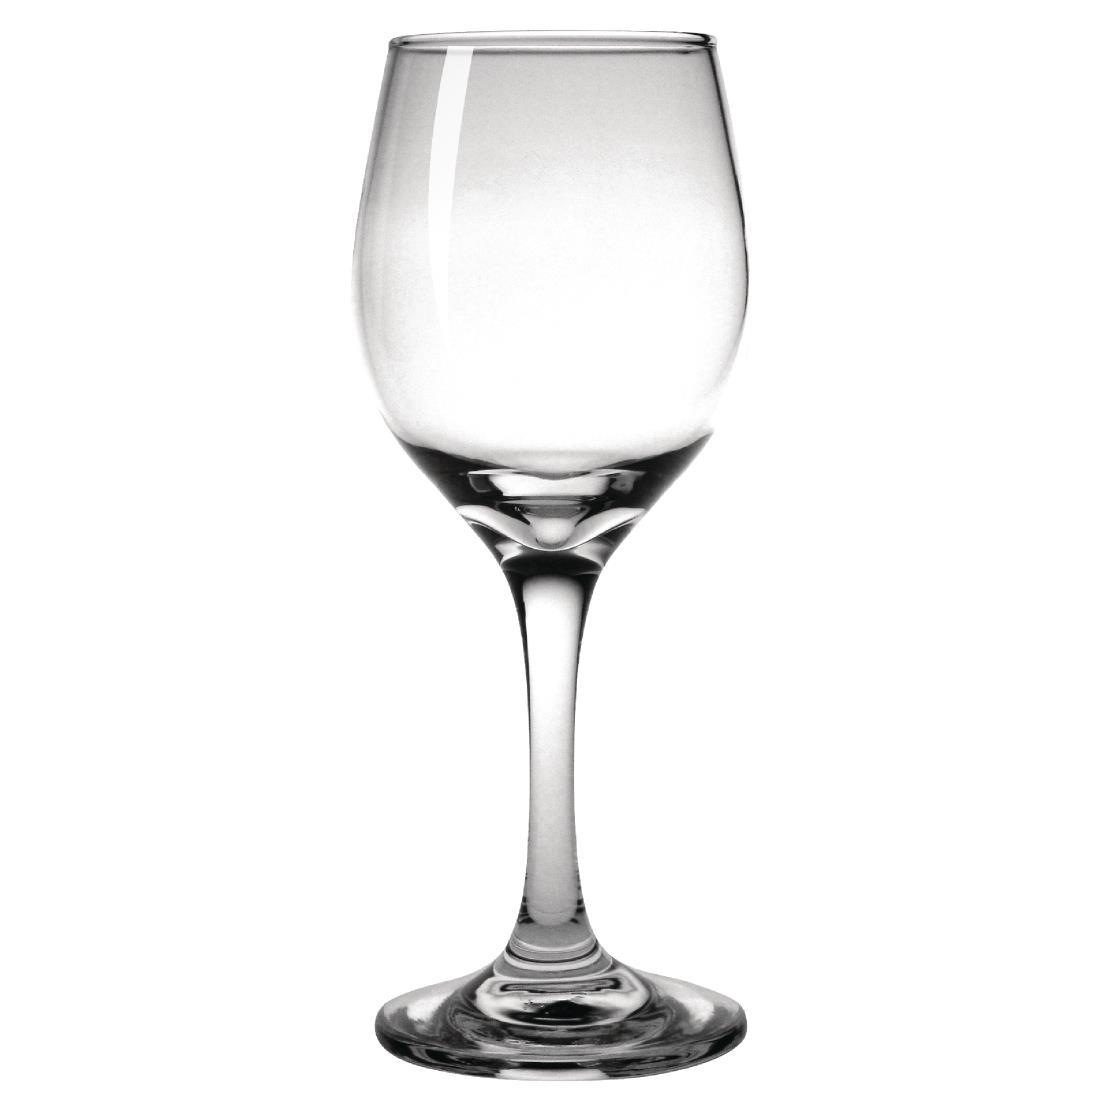 Olympia Solar Wine Glasses 245ml (Pack of 96) - GD324  - 1